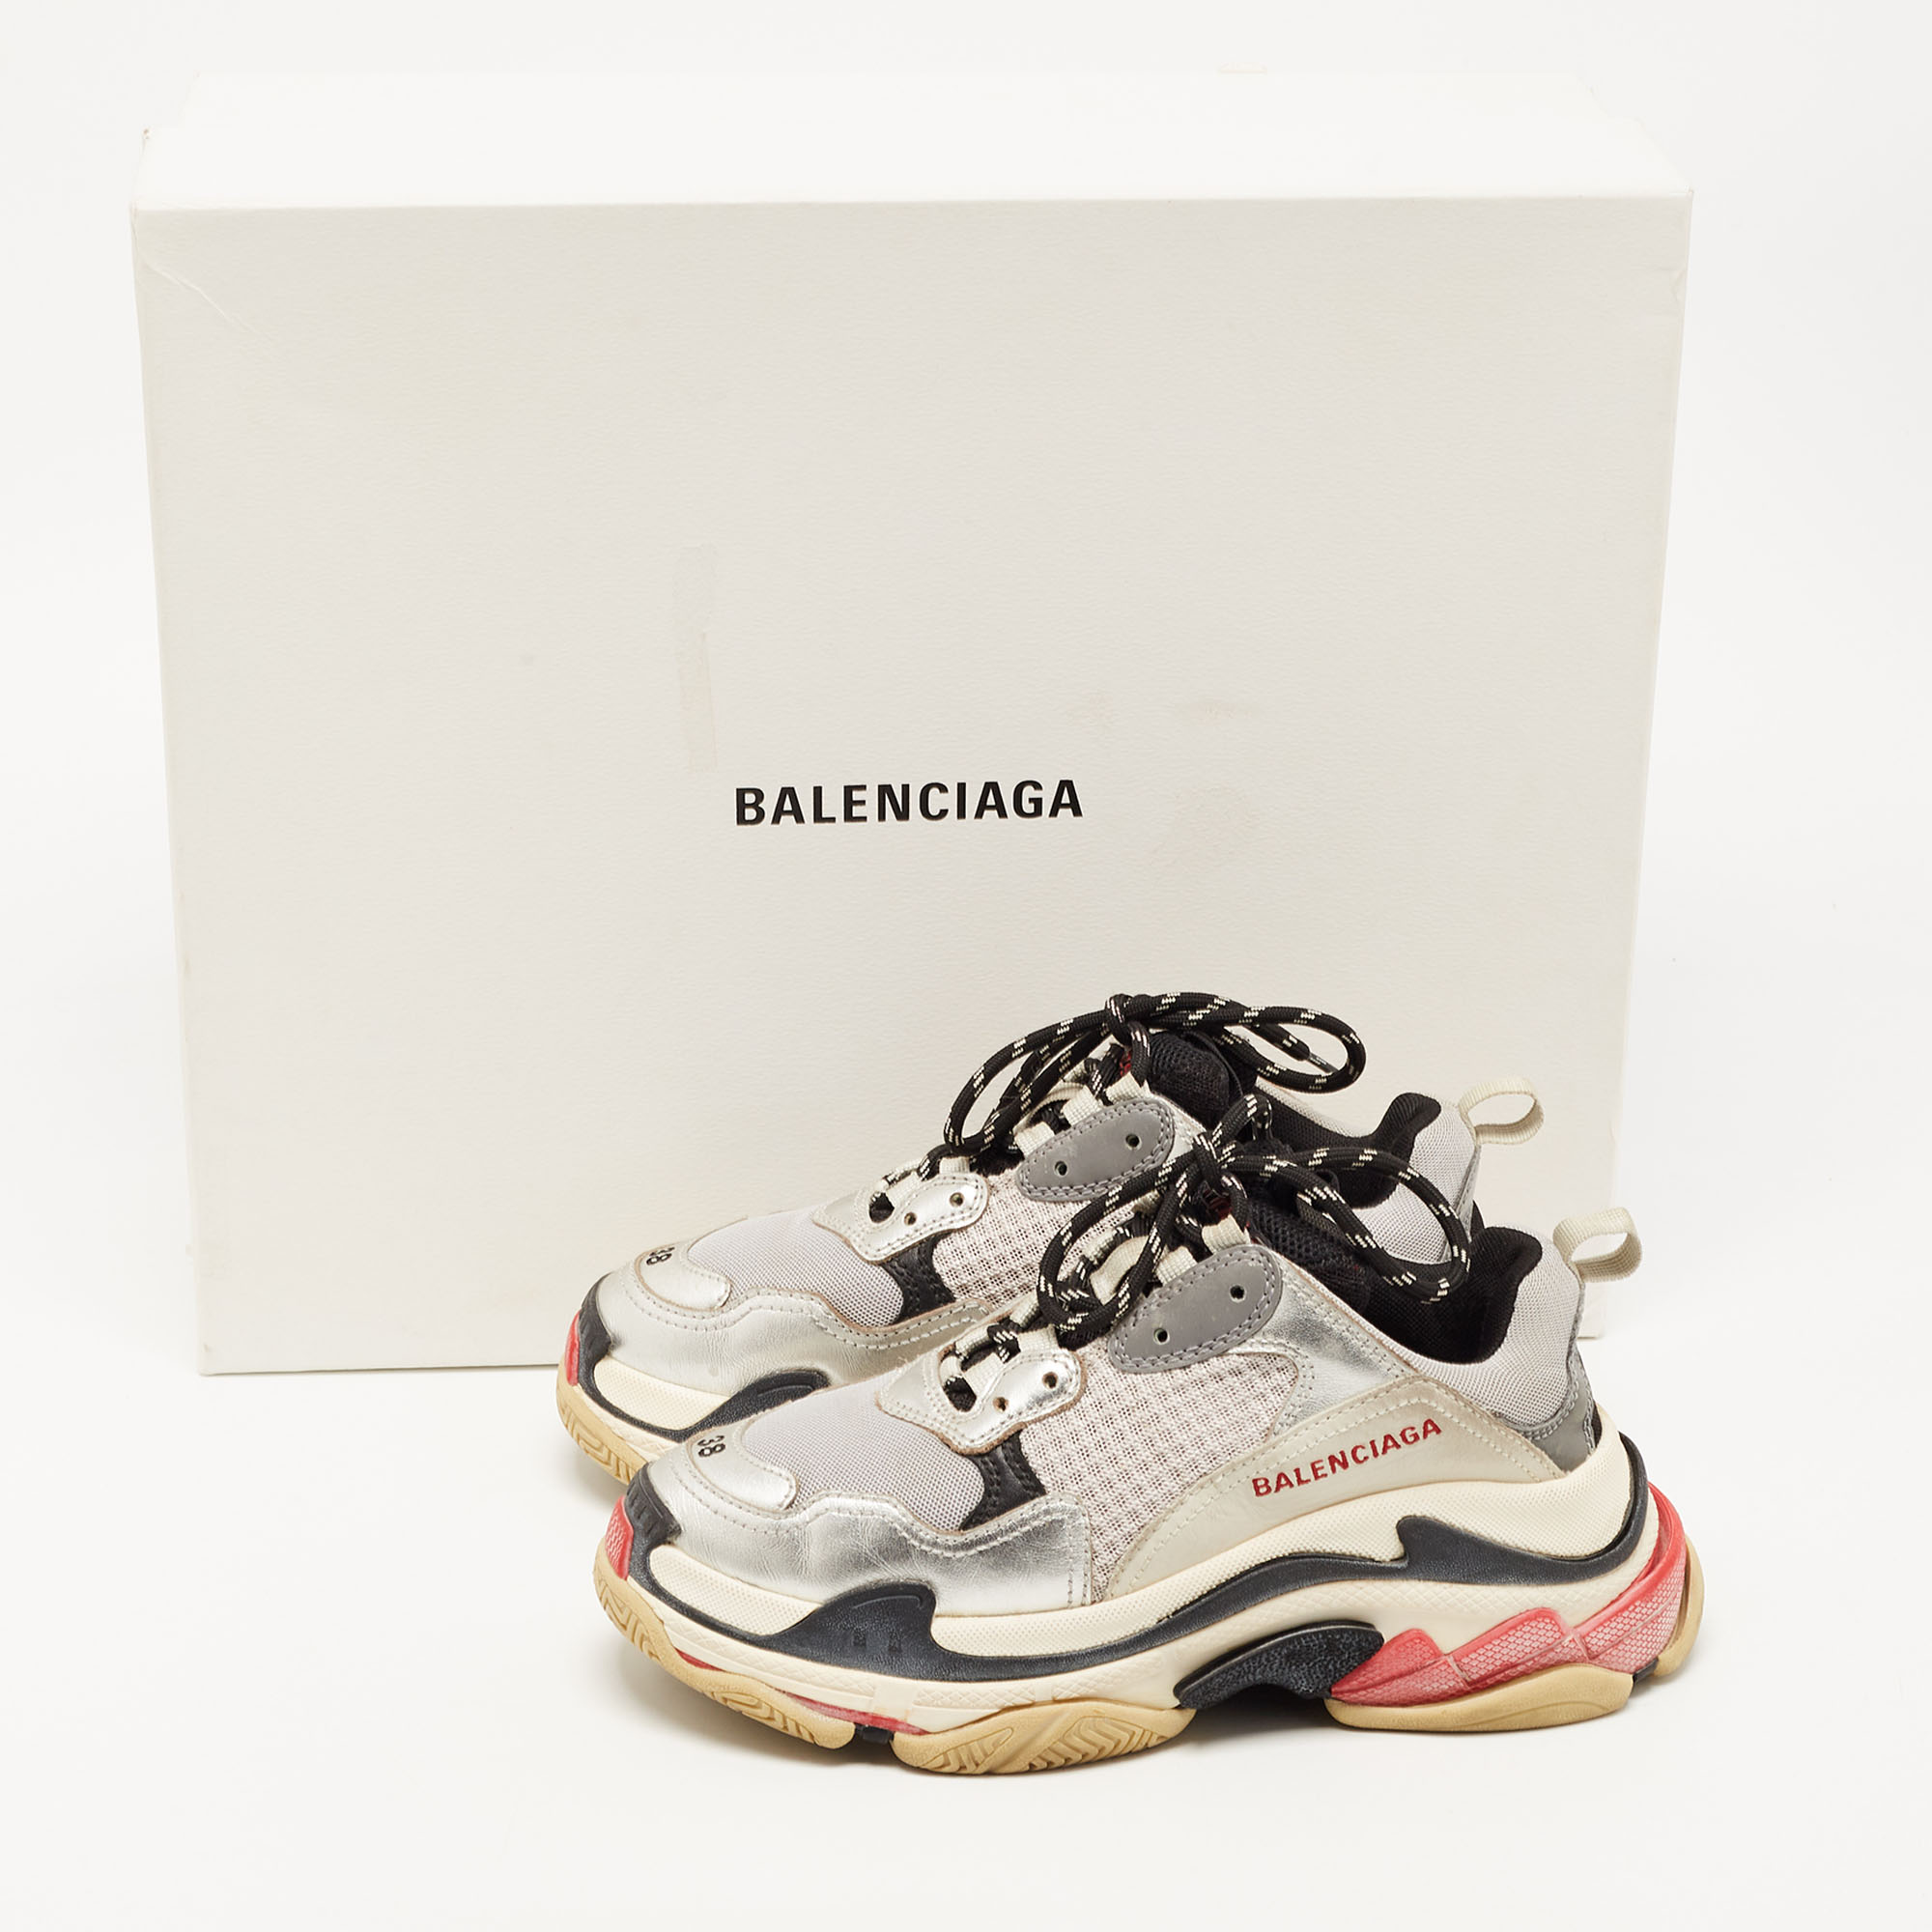 Balenciaga Silver/Grey Leather And Mesh Triple S Sneakers Size 38